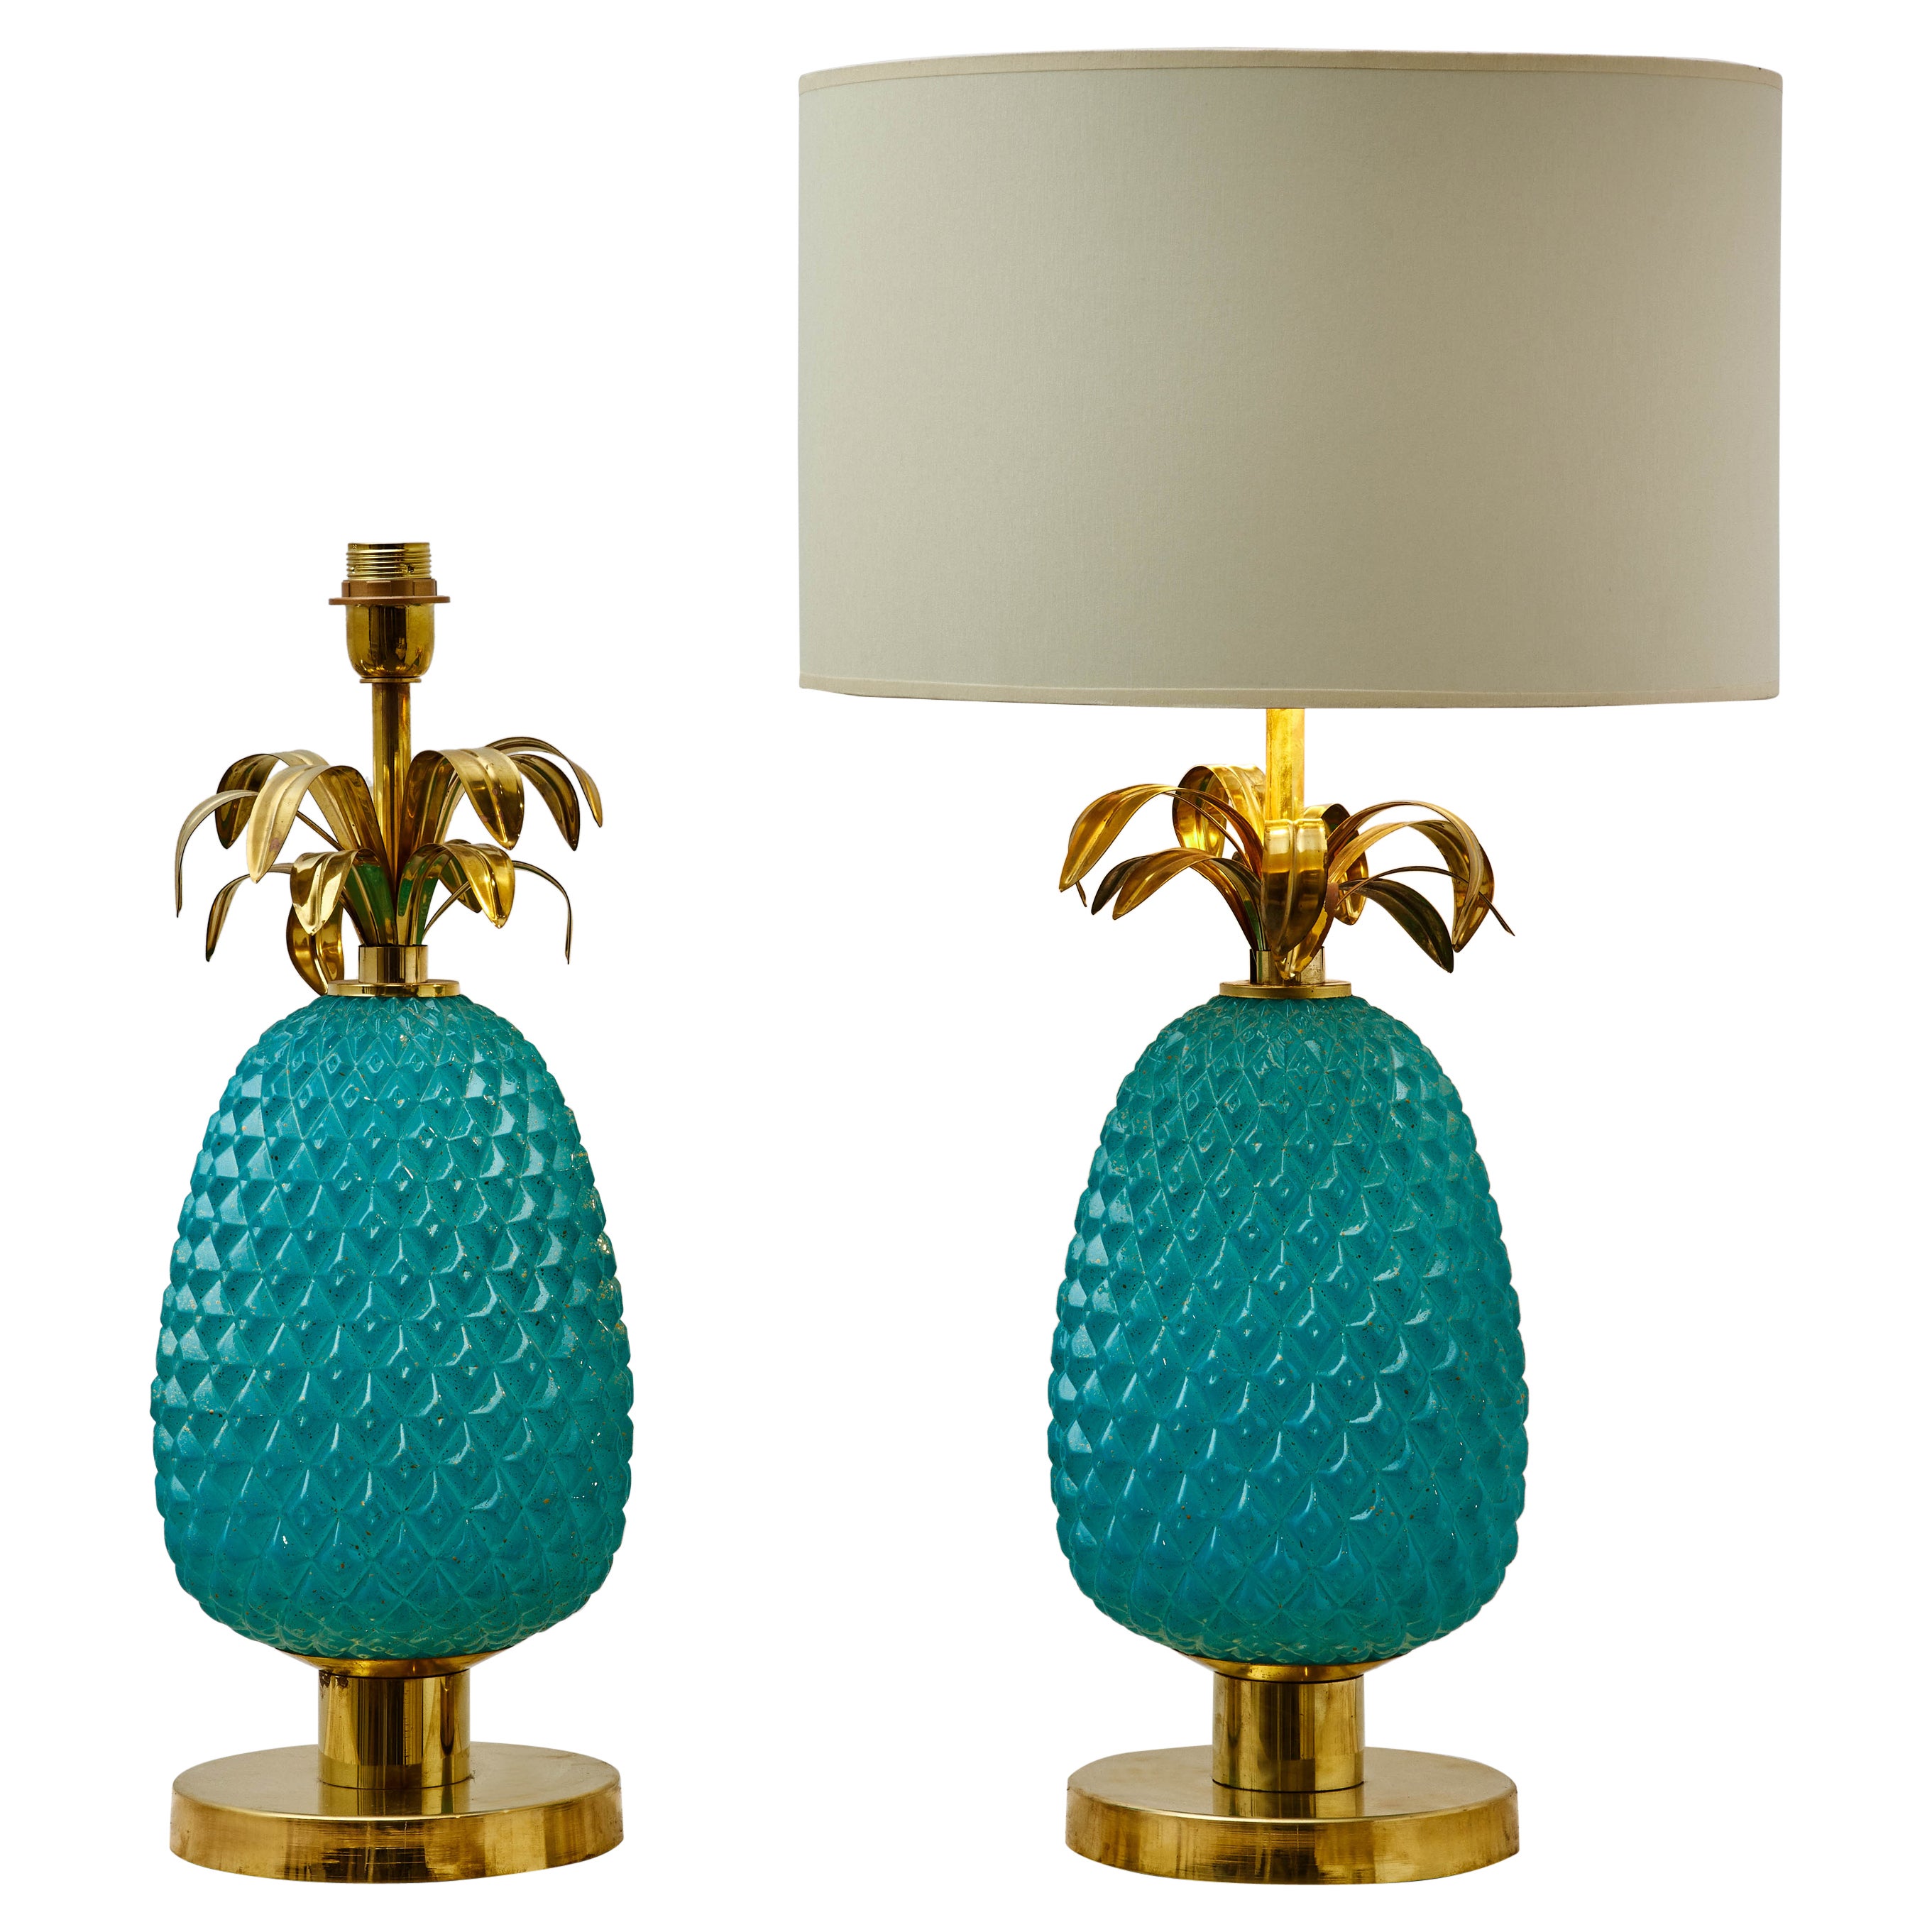 "Pineapple" Table Lamps at Cost Price For Sale